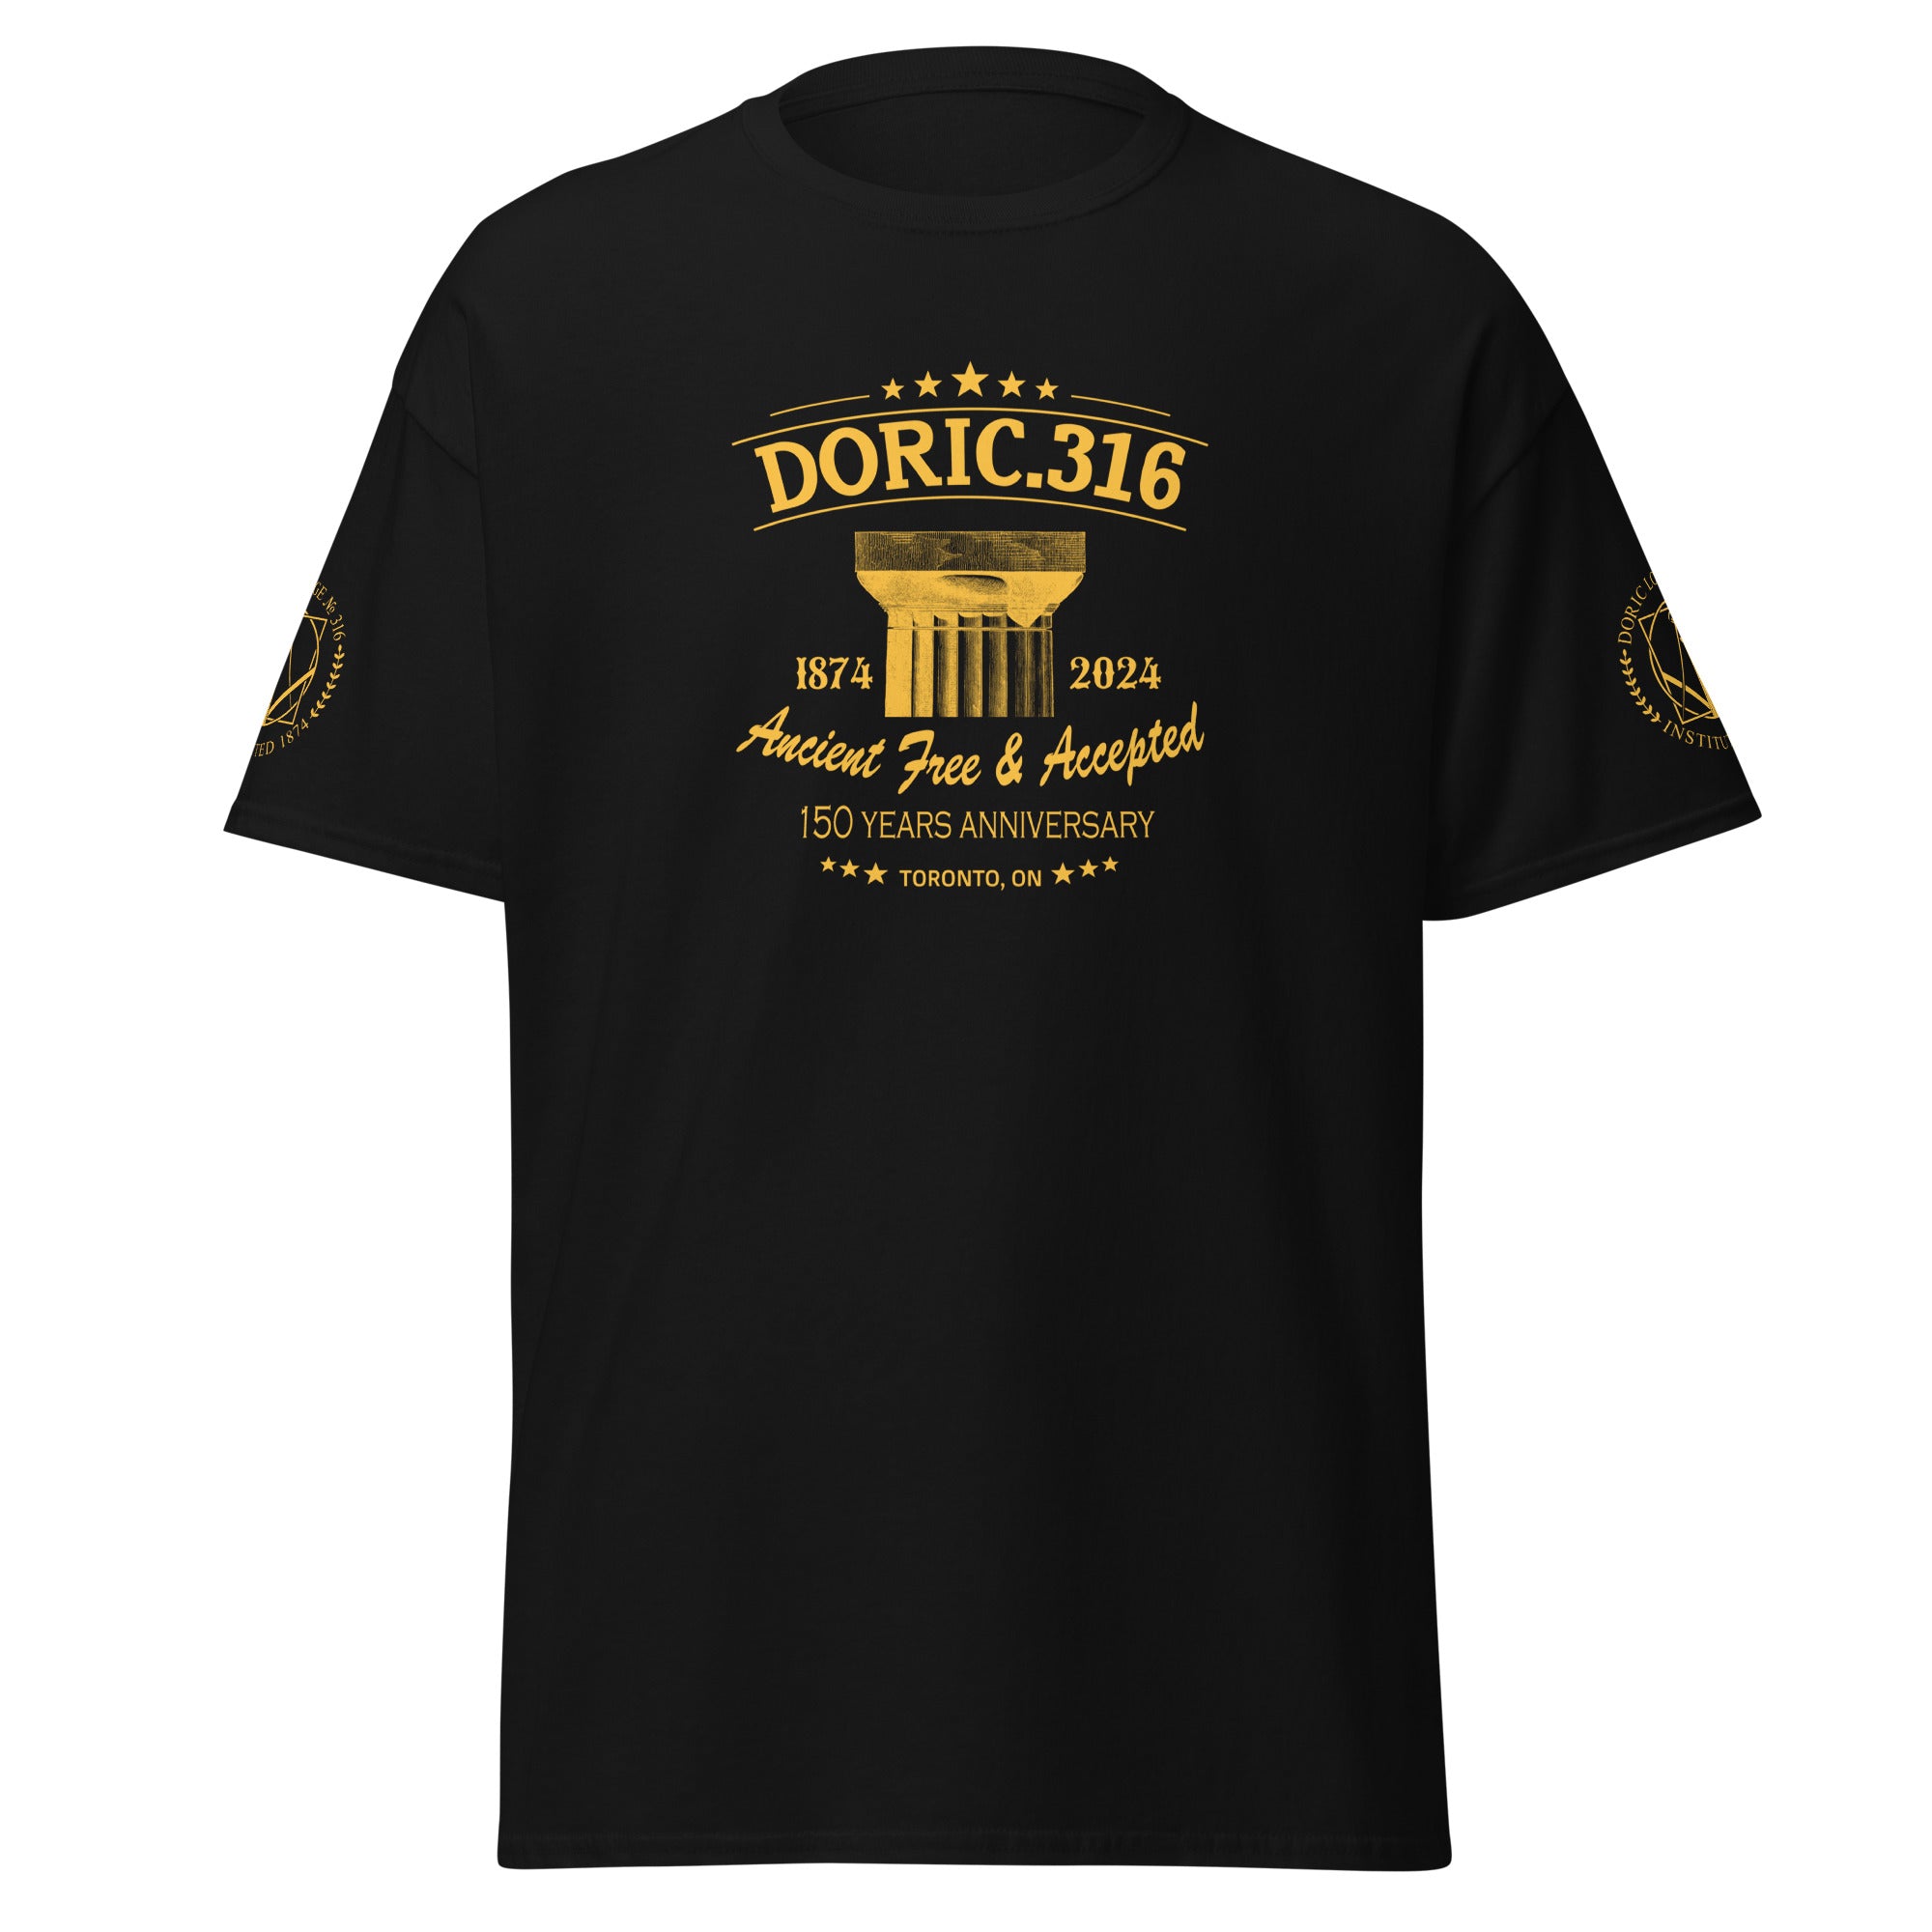 Doric 316 150th Anniversary T-shirt 4 SIDES PRINT (FRONT, BACK, SLEEVES)